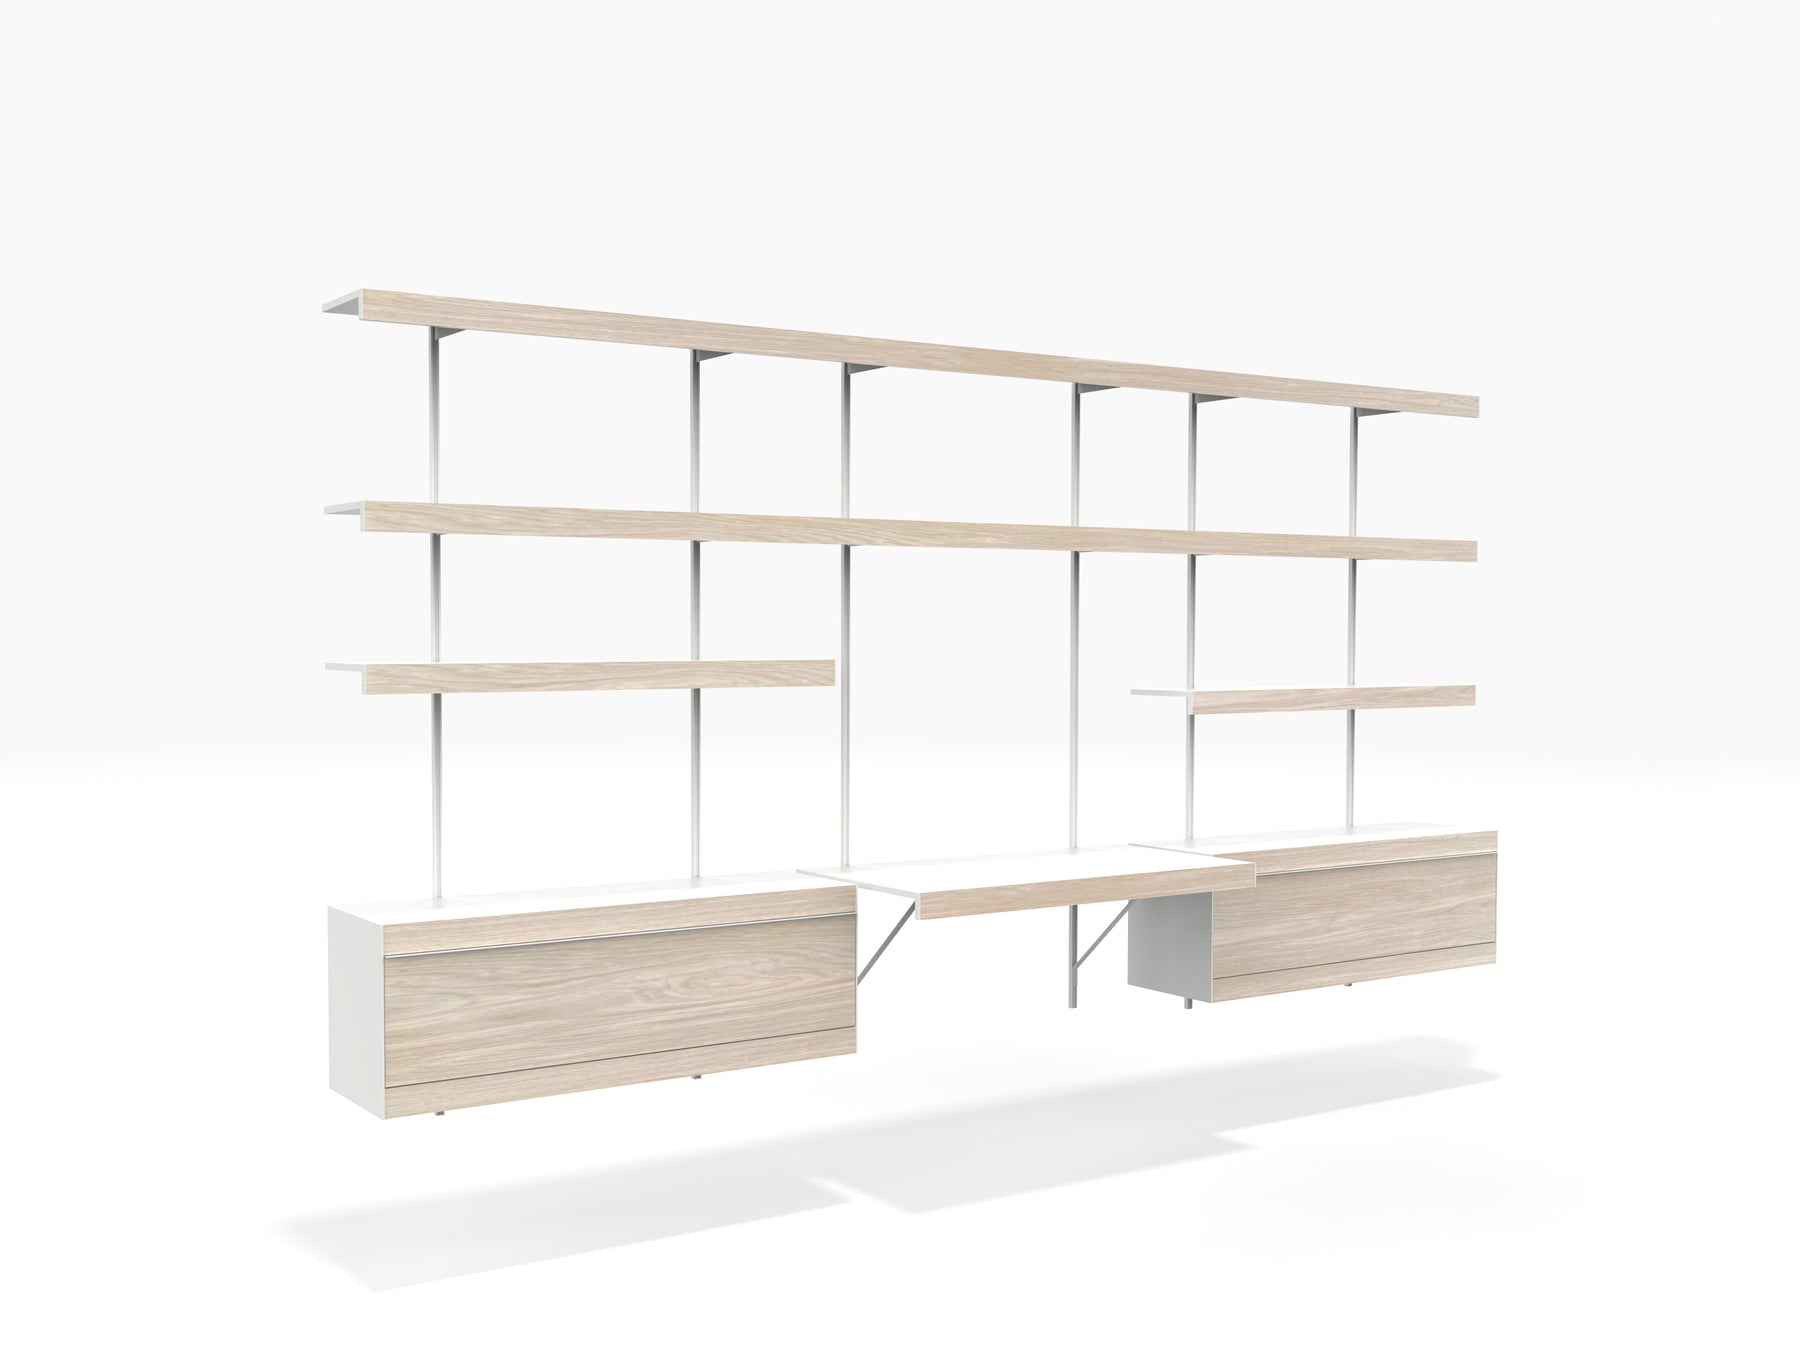 Oak shelving system with wall mounted desk and shelving